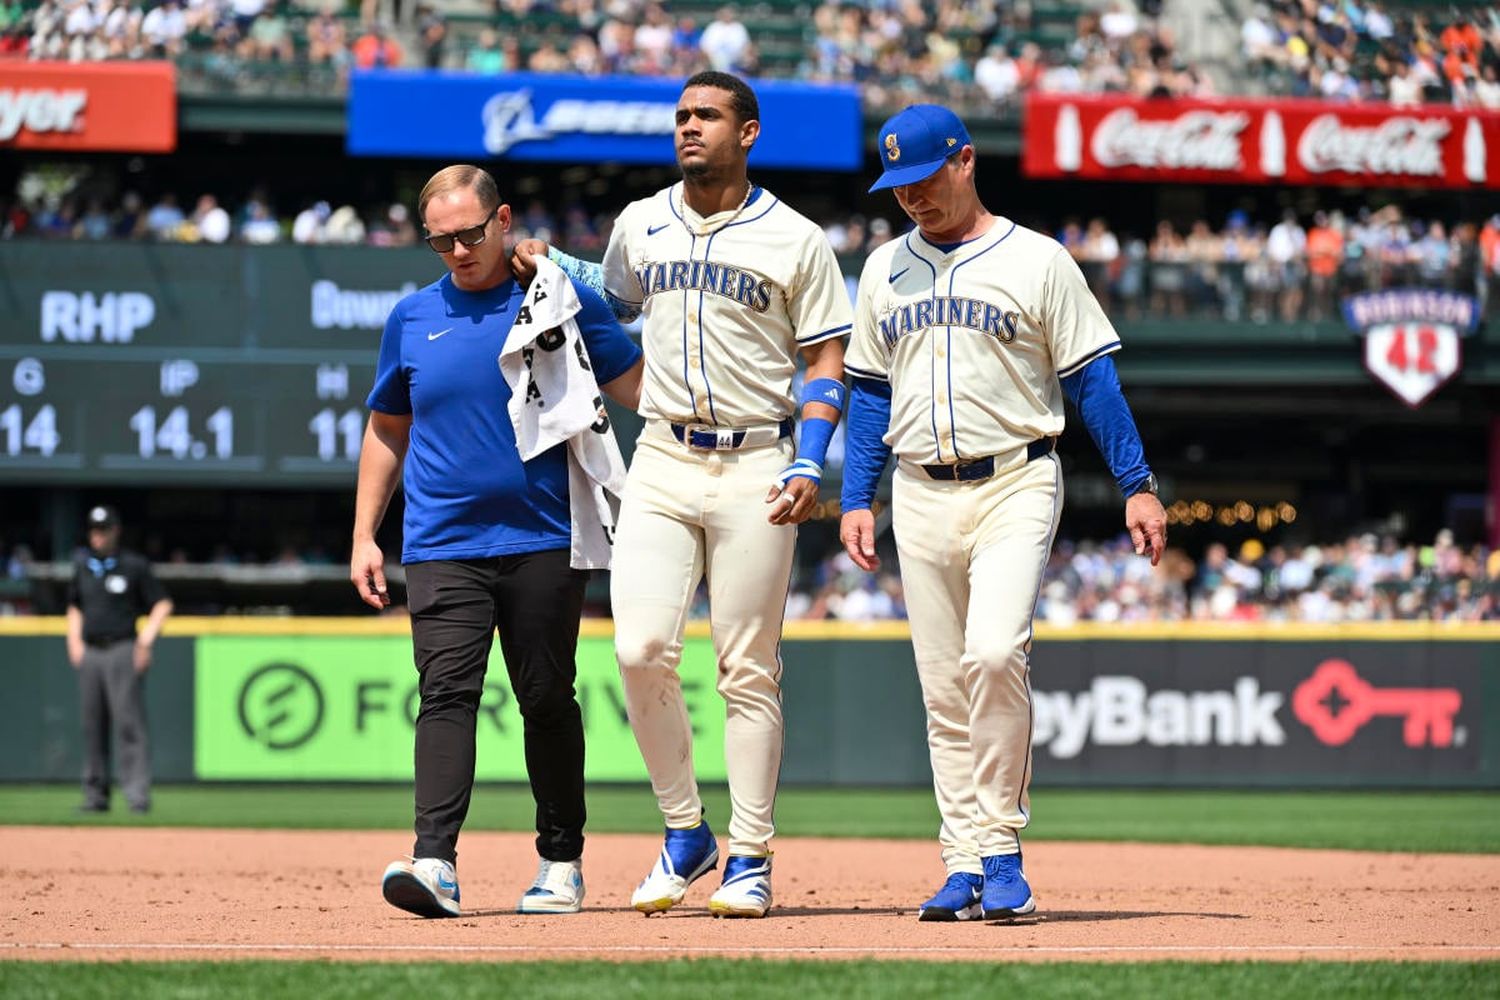 Mariners Star Julio Rodríguez Leaves Win Over Astros Due to Ankle Injury After Crashing into Outfield Wall